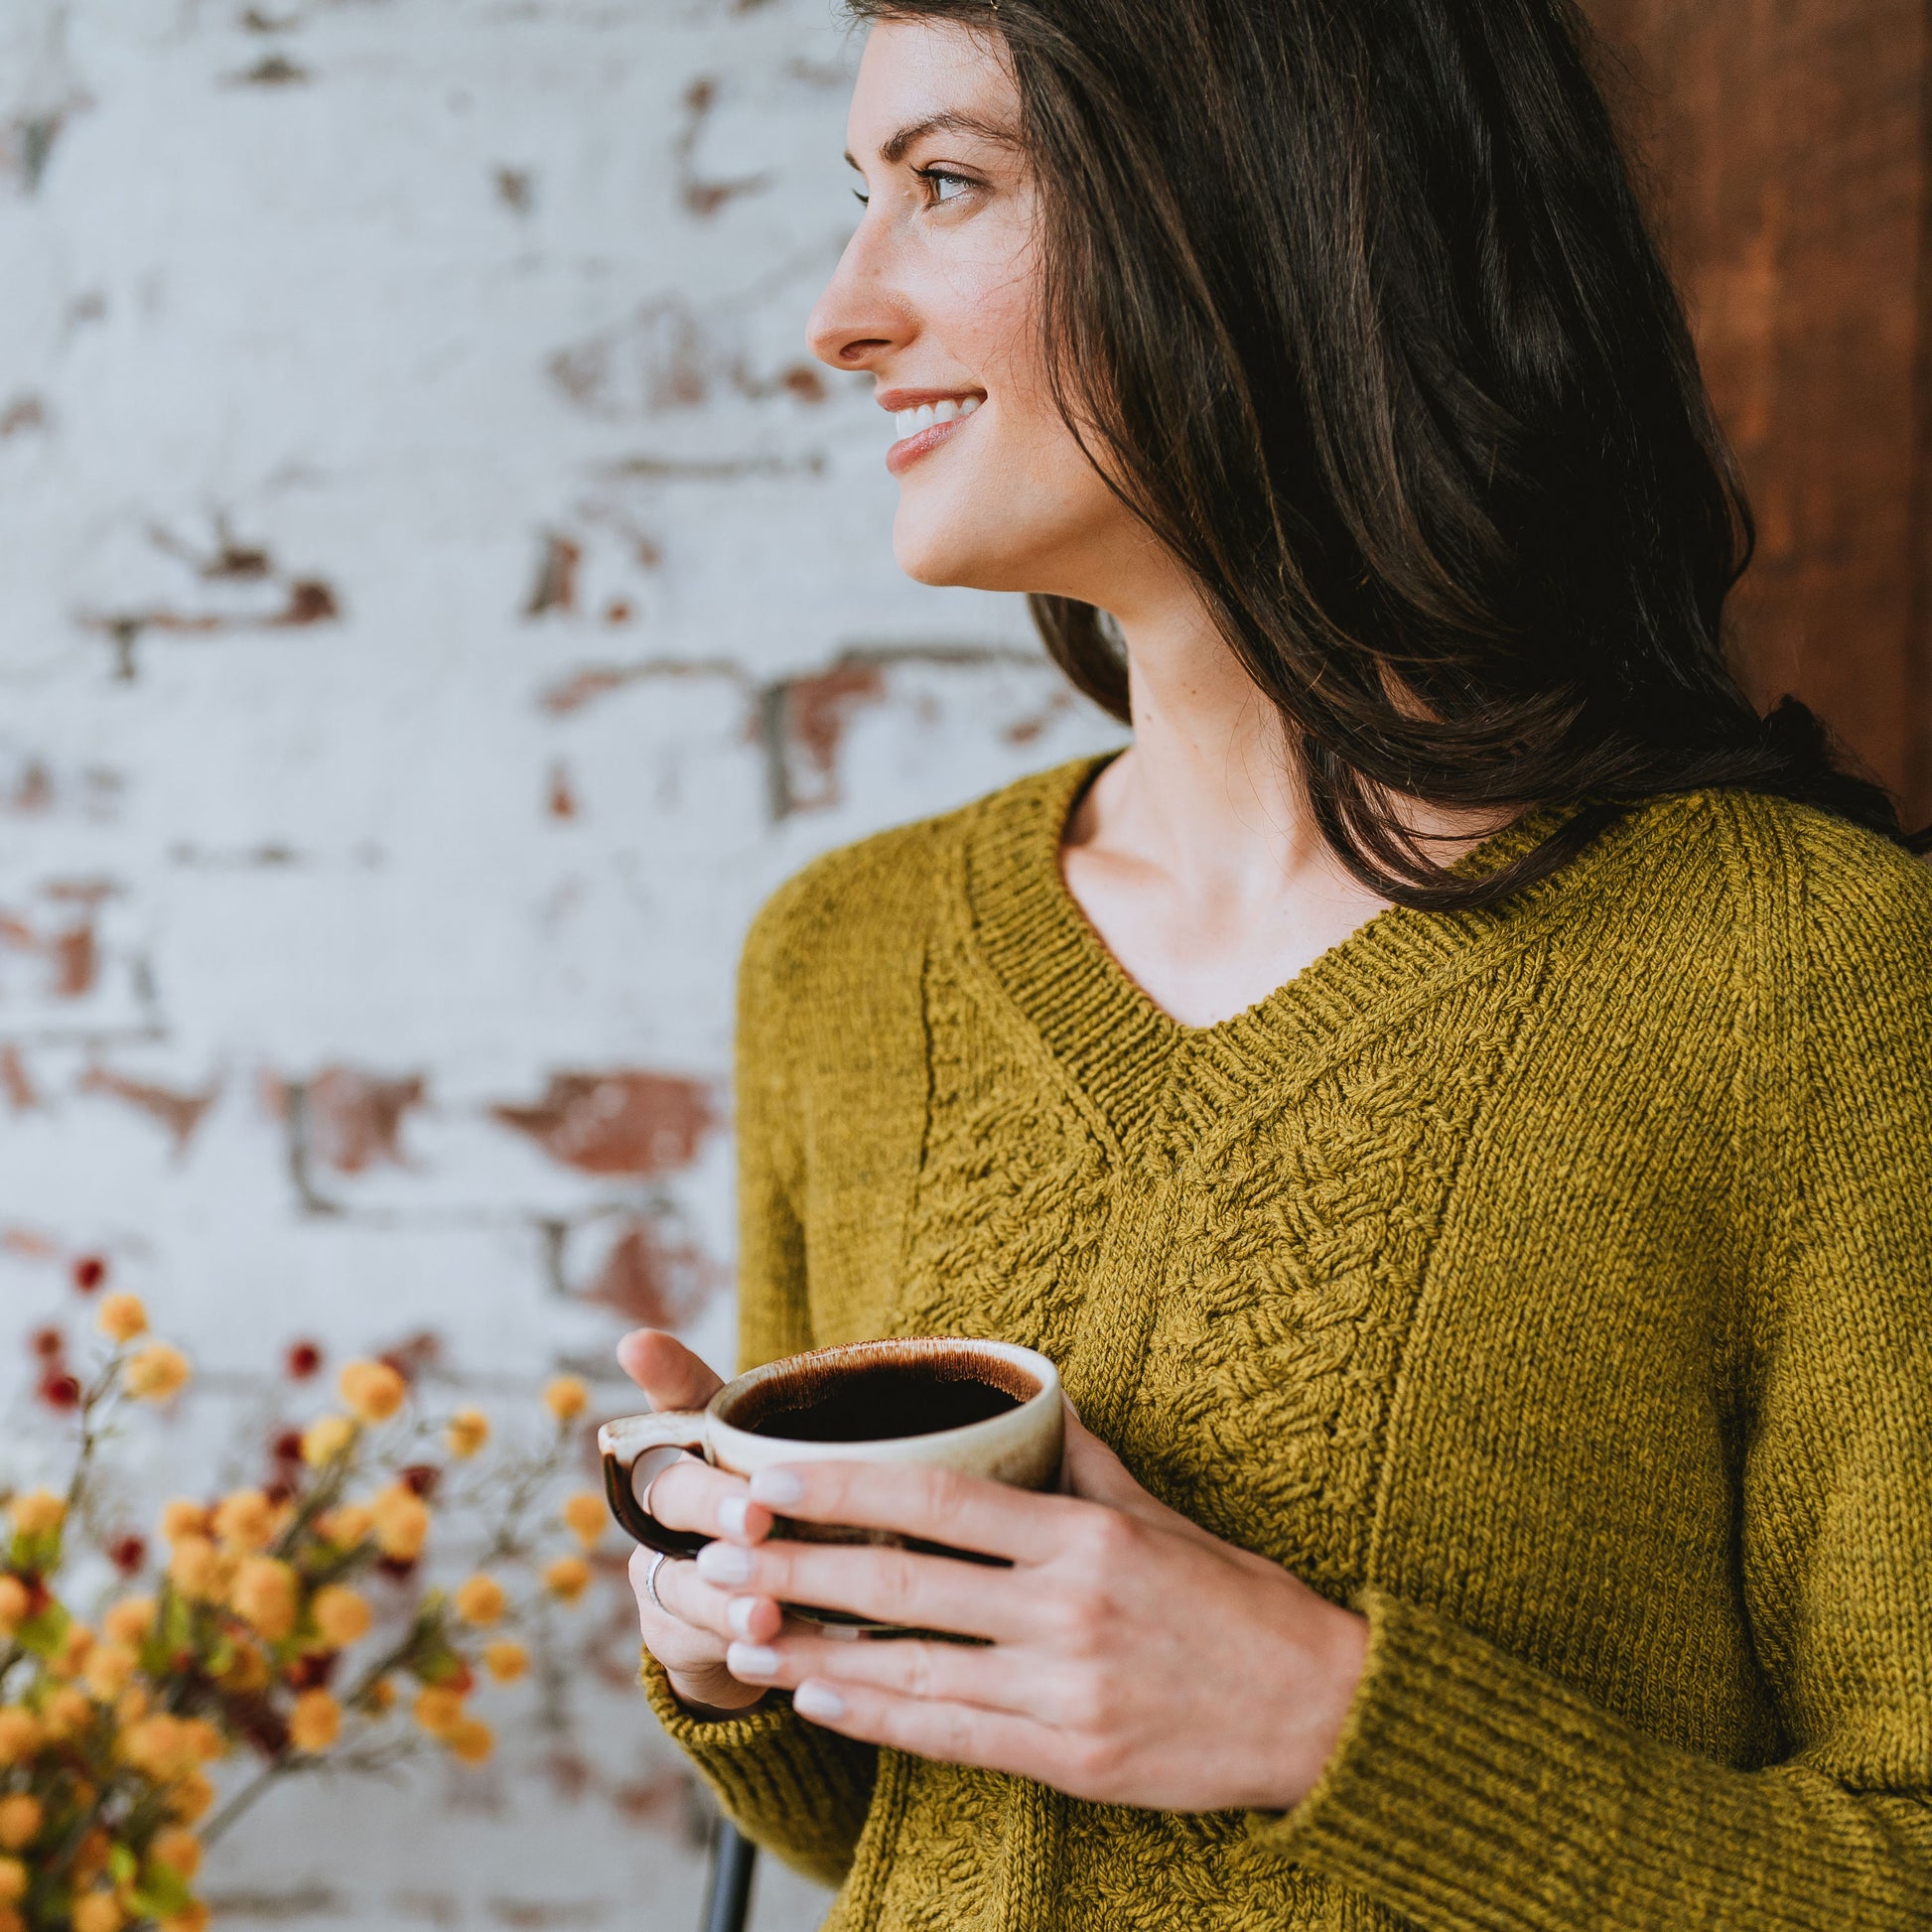 Seen at a three quarter angle, Laura looks off camera, holding a cup of coffee. She wears a hand knit sweater with cable details and a V-neck.